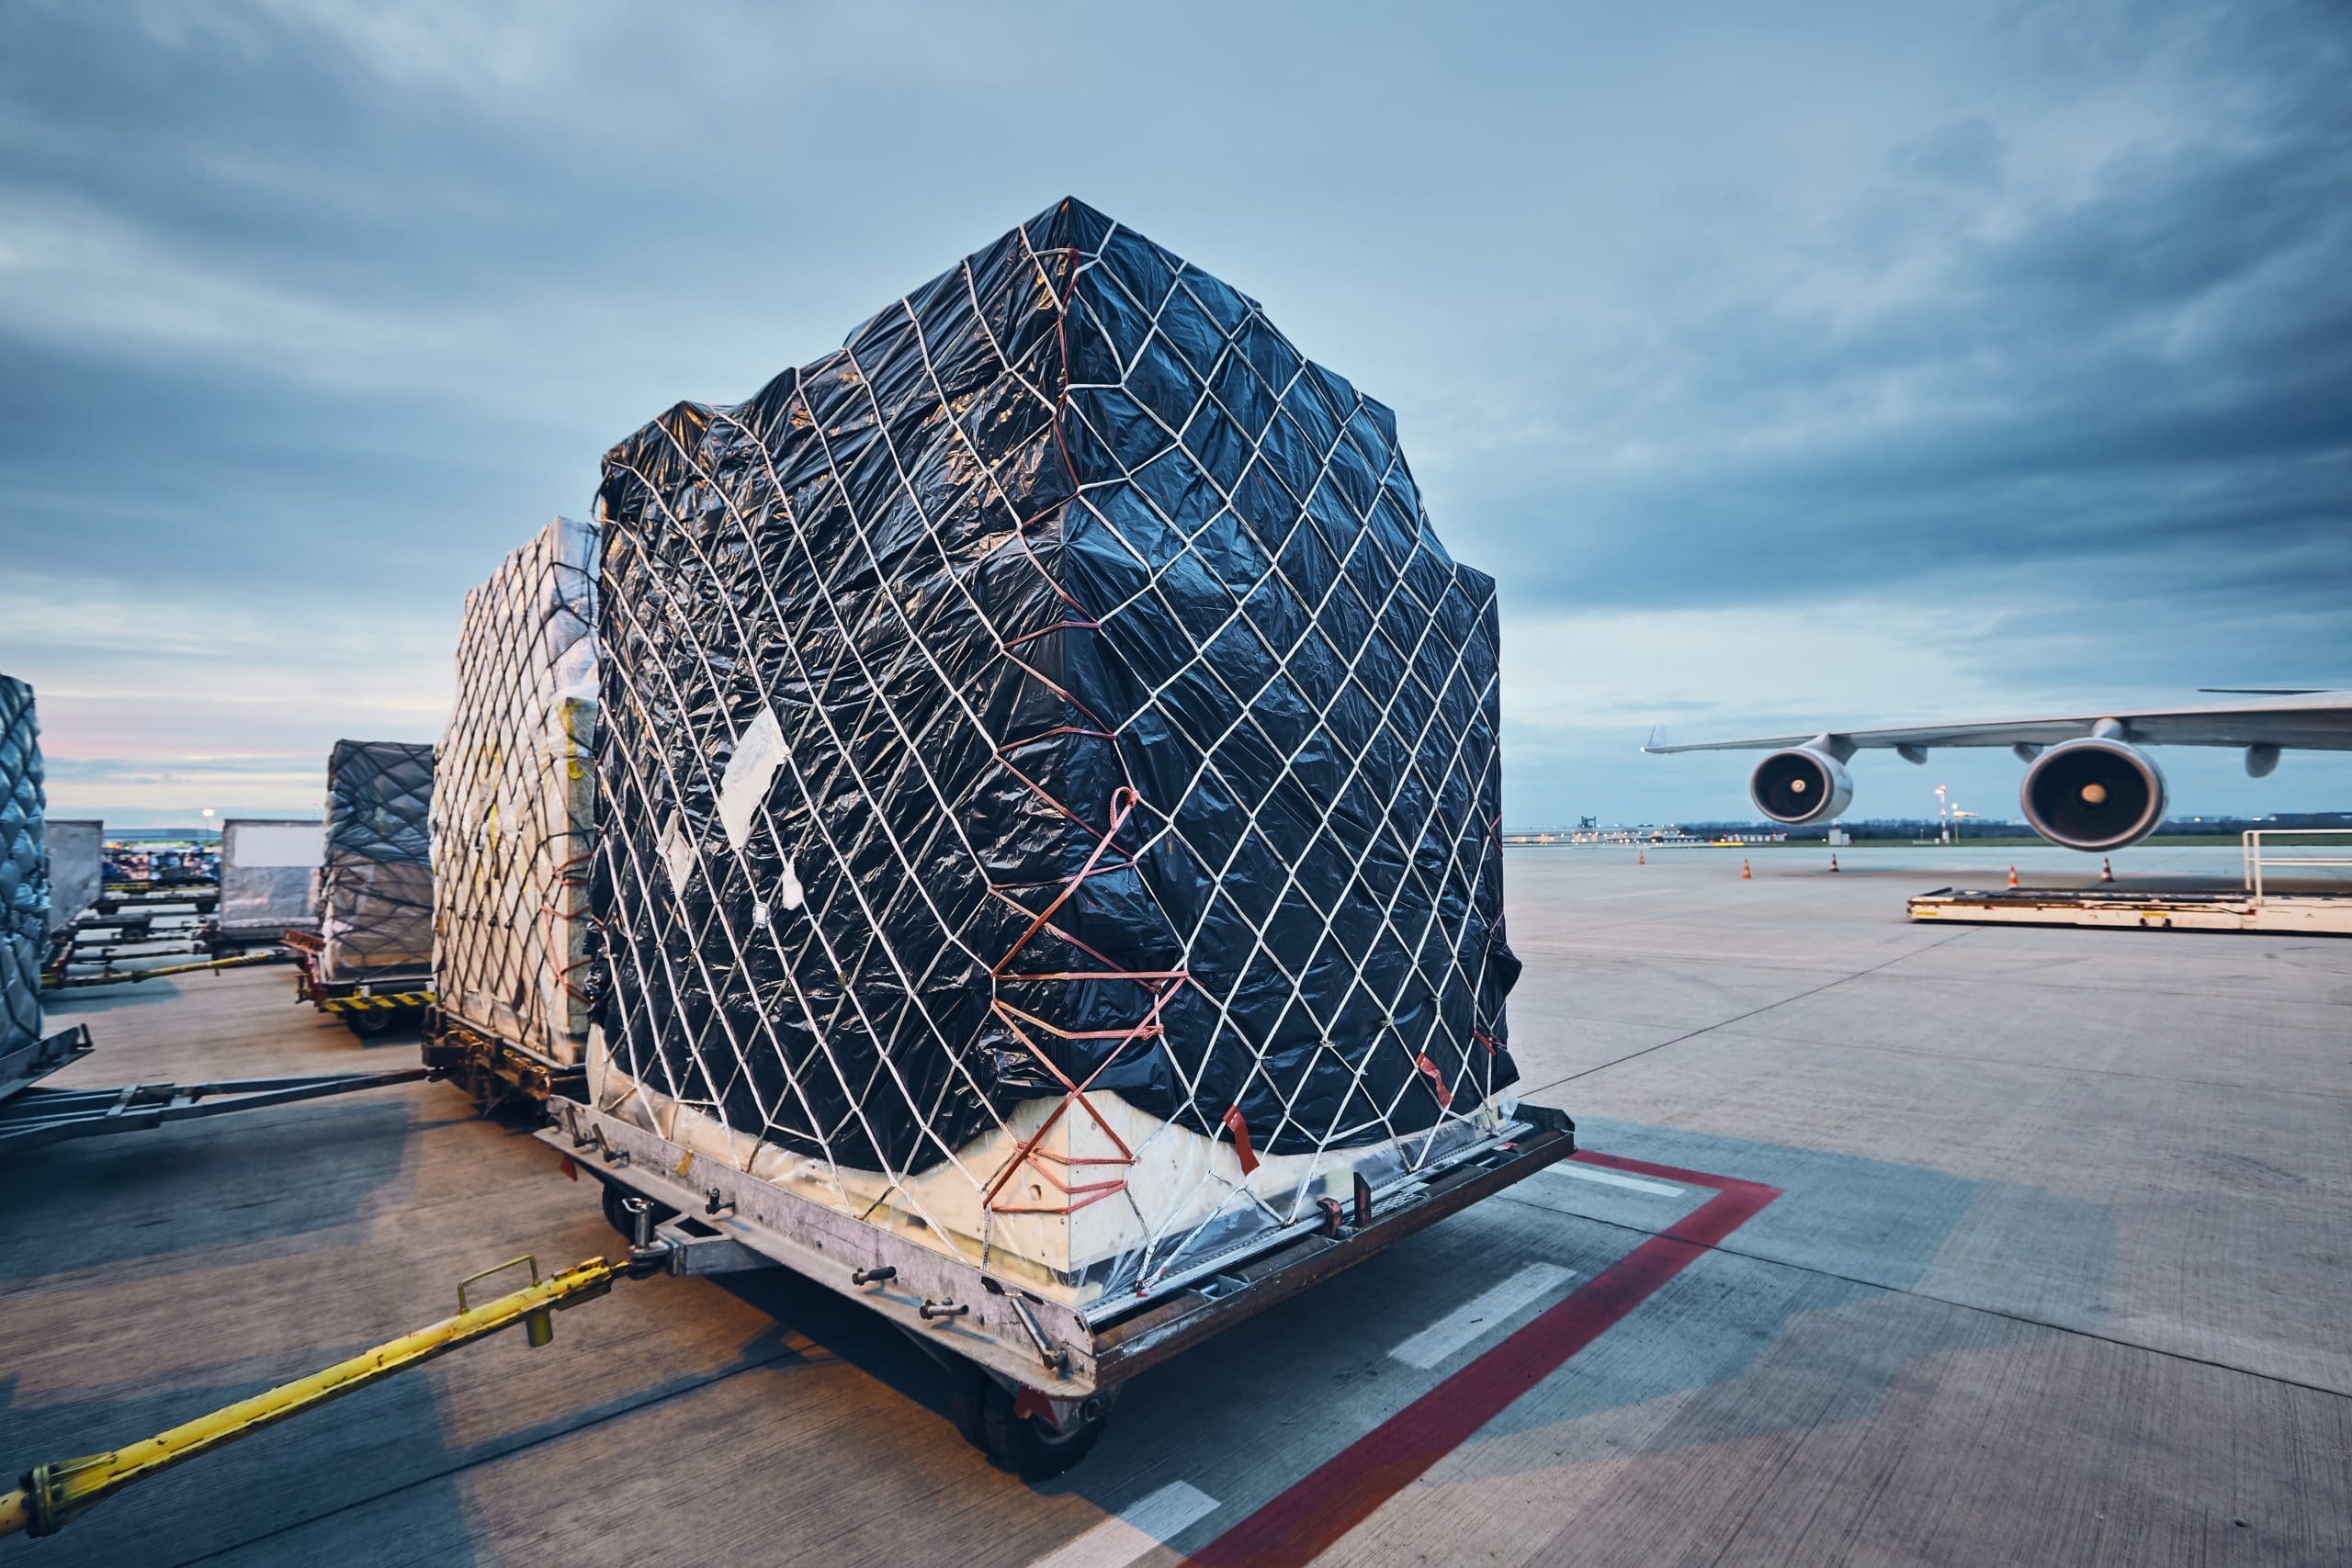 New security system brings changes to EU imports - Air Cargo World